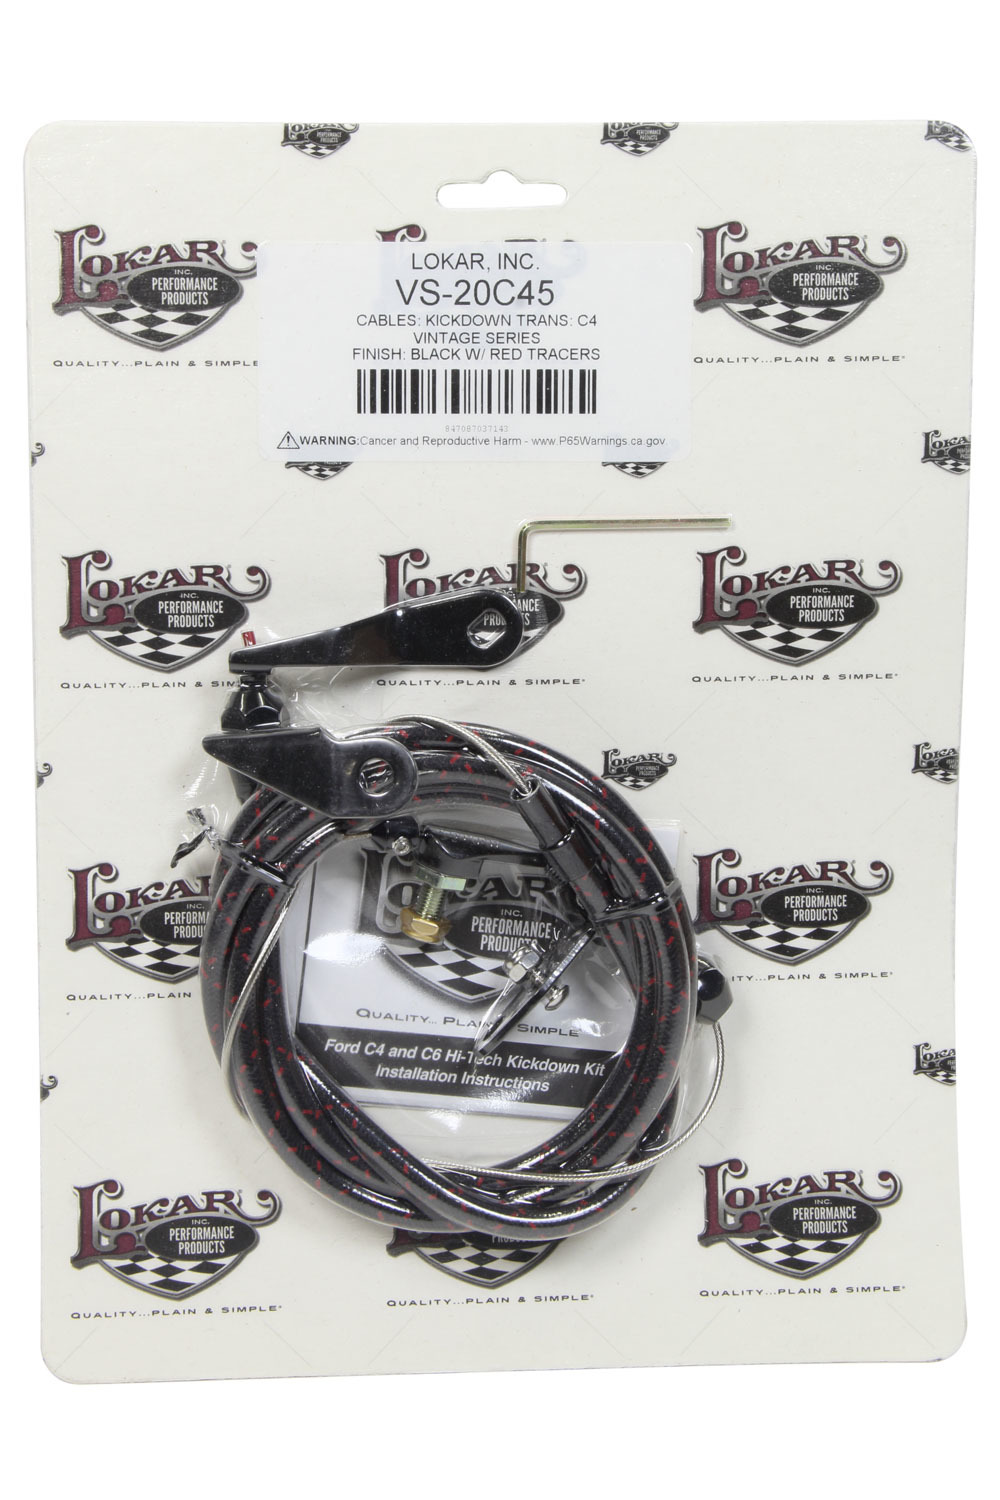 Lokar VS-20C45 Kickdown Cable, Vintage Series, 60 in Length, Woven Cotton, Aluminum Fittings, Black / Red, Ford C4, Kit